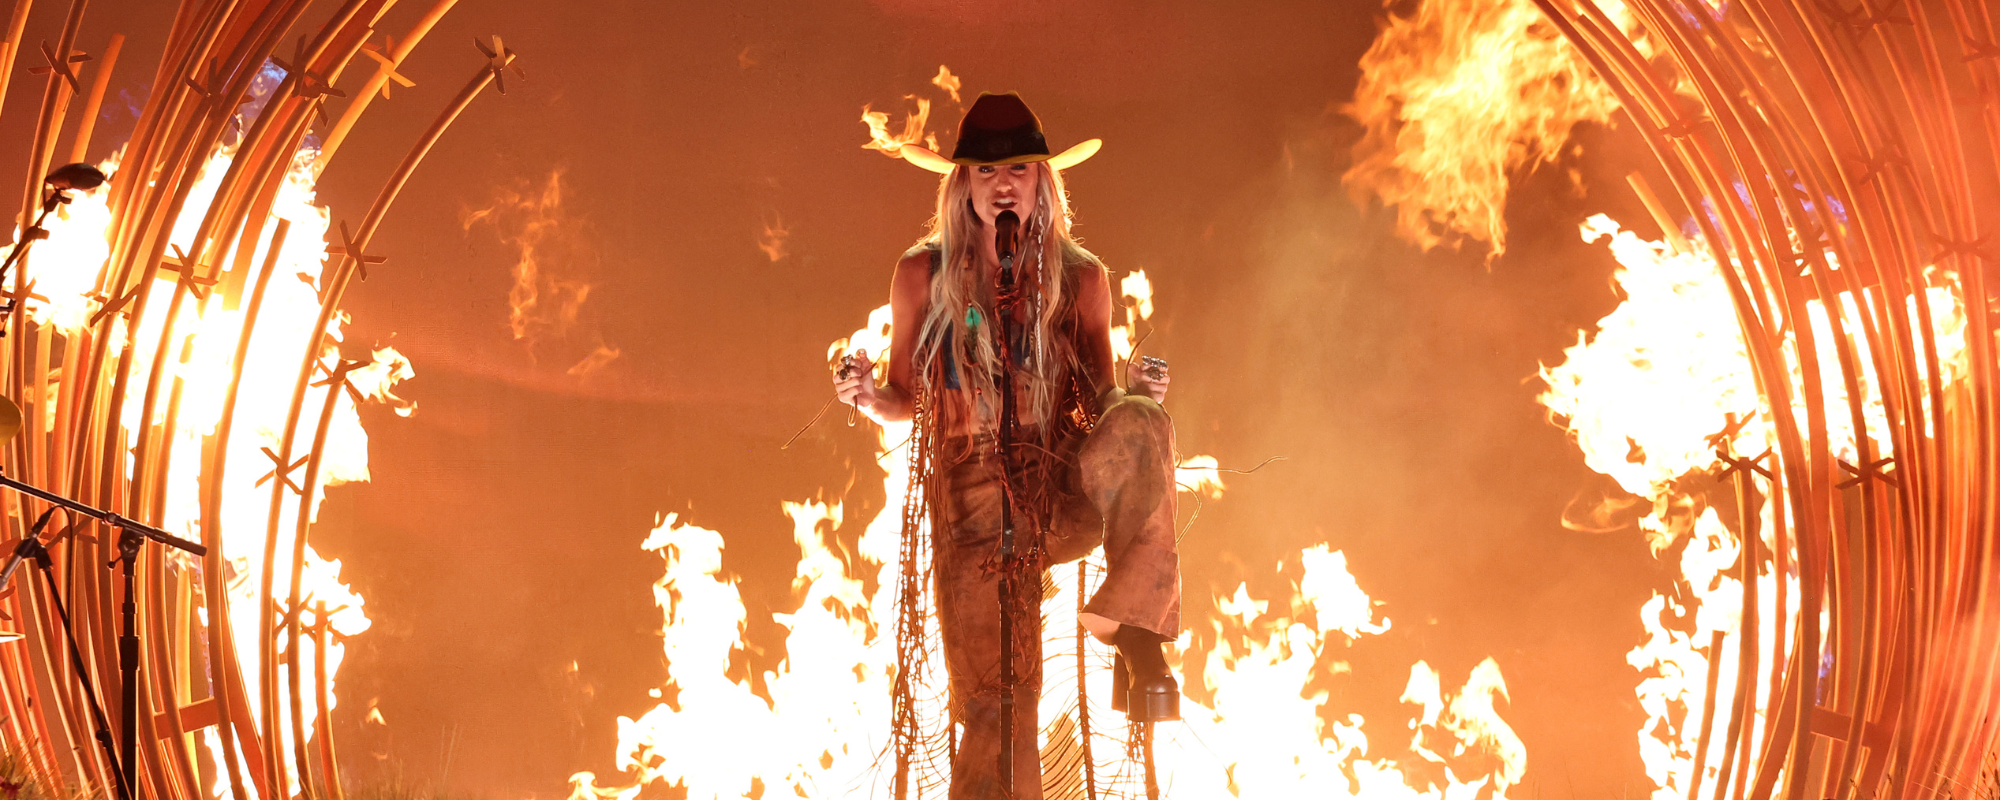 WATCH: Lainey Wilson Brings the Fire to “Wildflowers and Wild Horses” Performance at CMA Awards